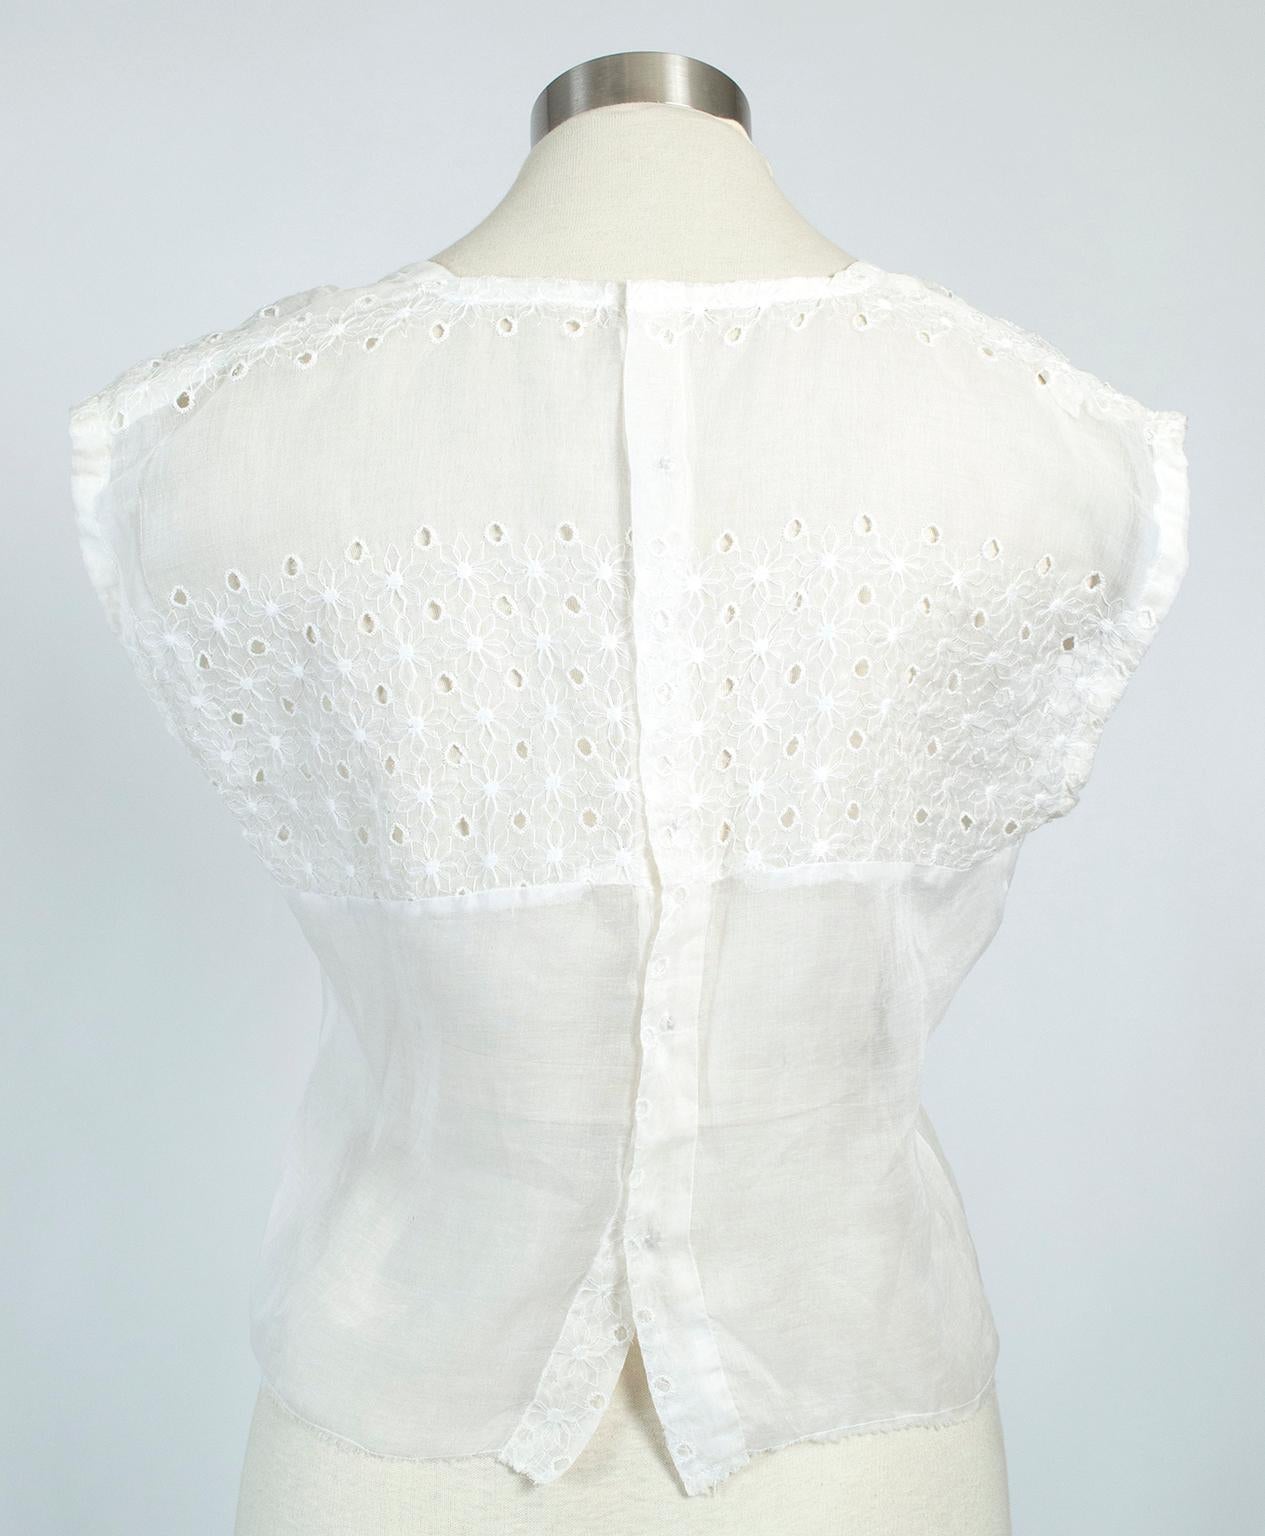 Edwardian Sheer White Organdy Eyelet Cap Sleeve Blouse w Square Neck  – S, 1910s For Sale 1